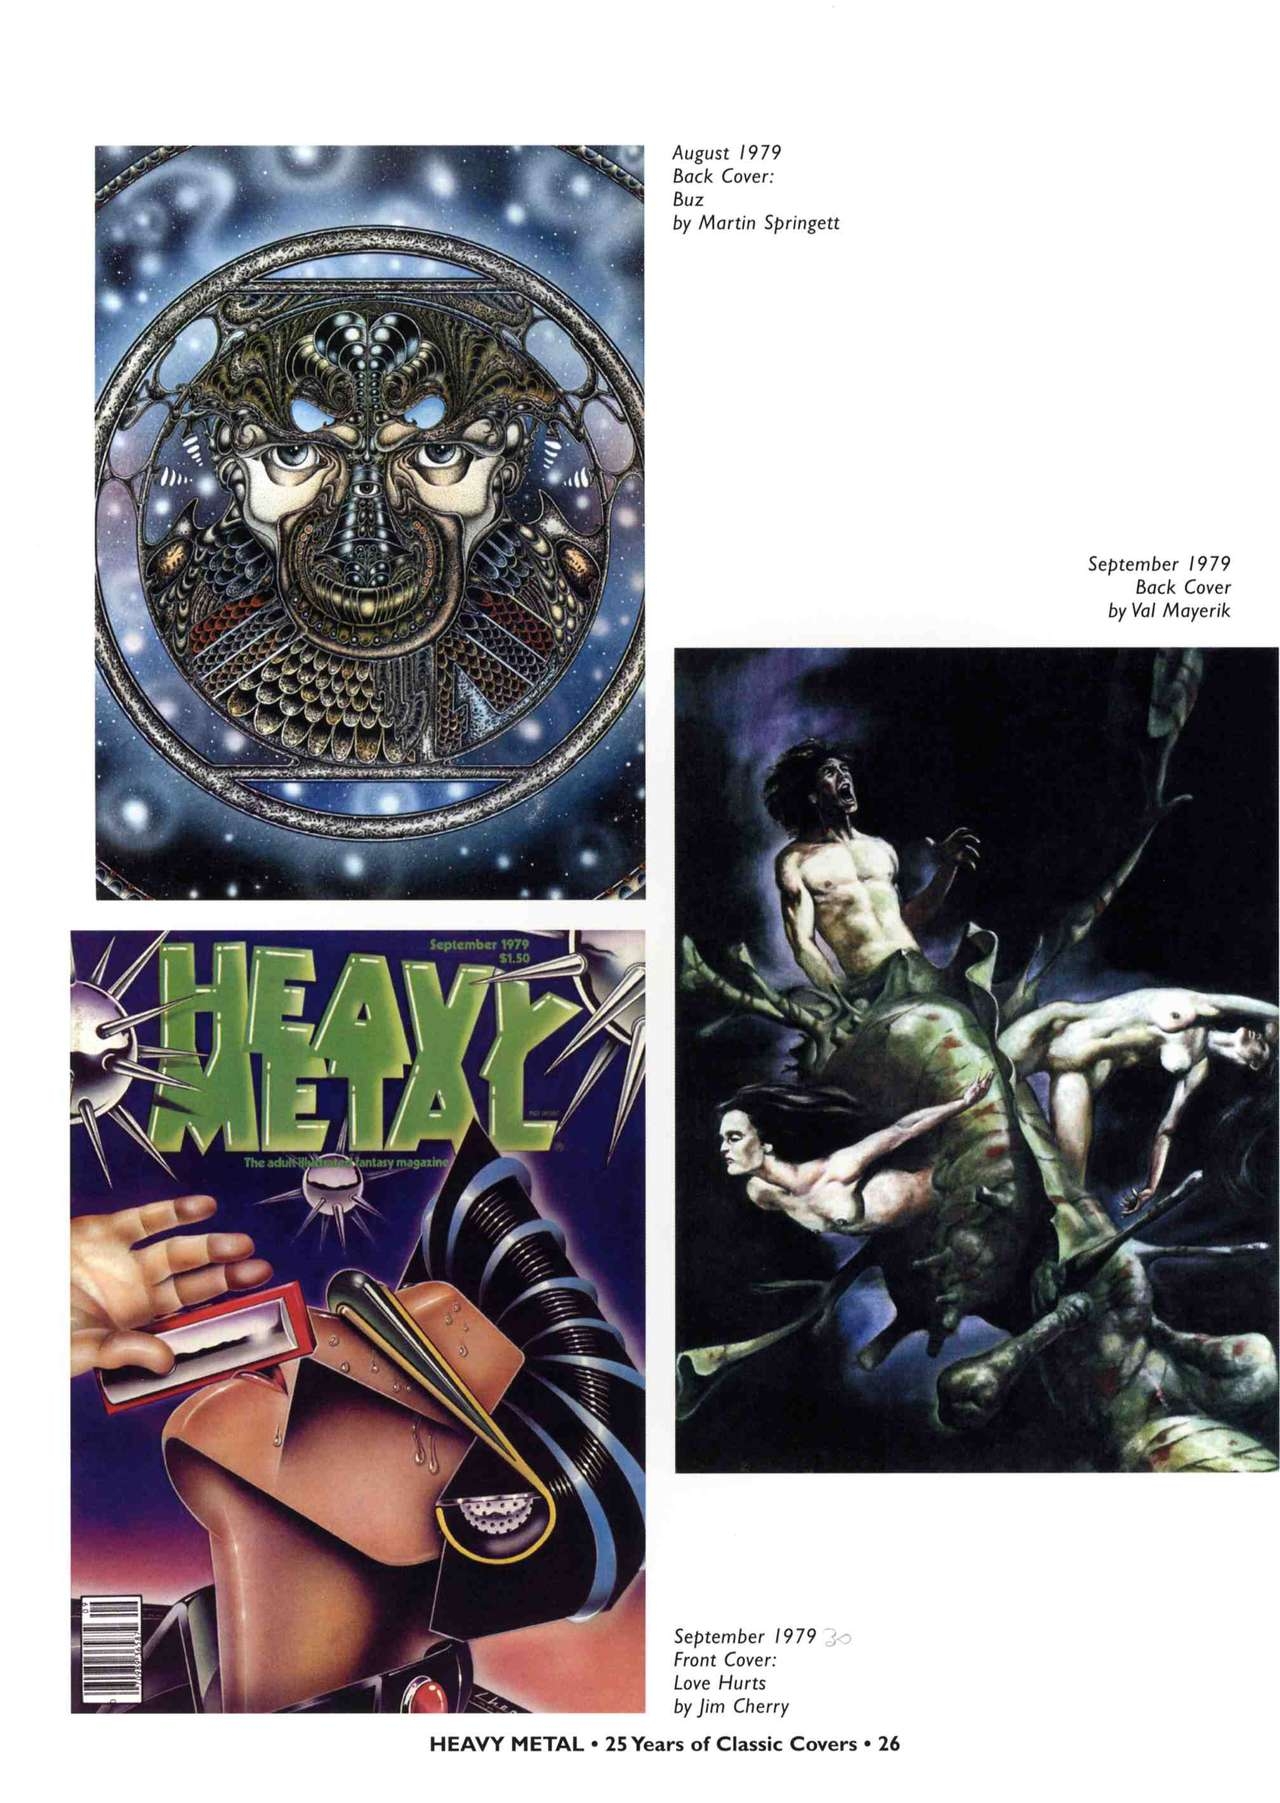 HEAVY METAL 25 Years of Classic Covers 31